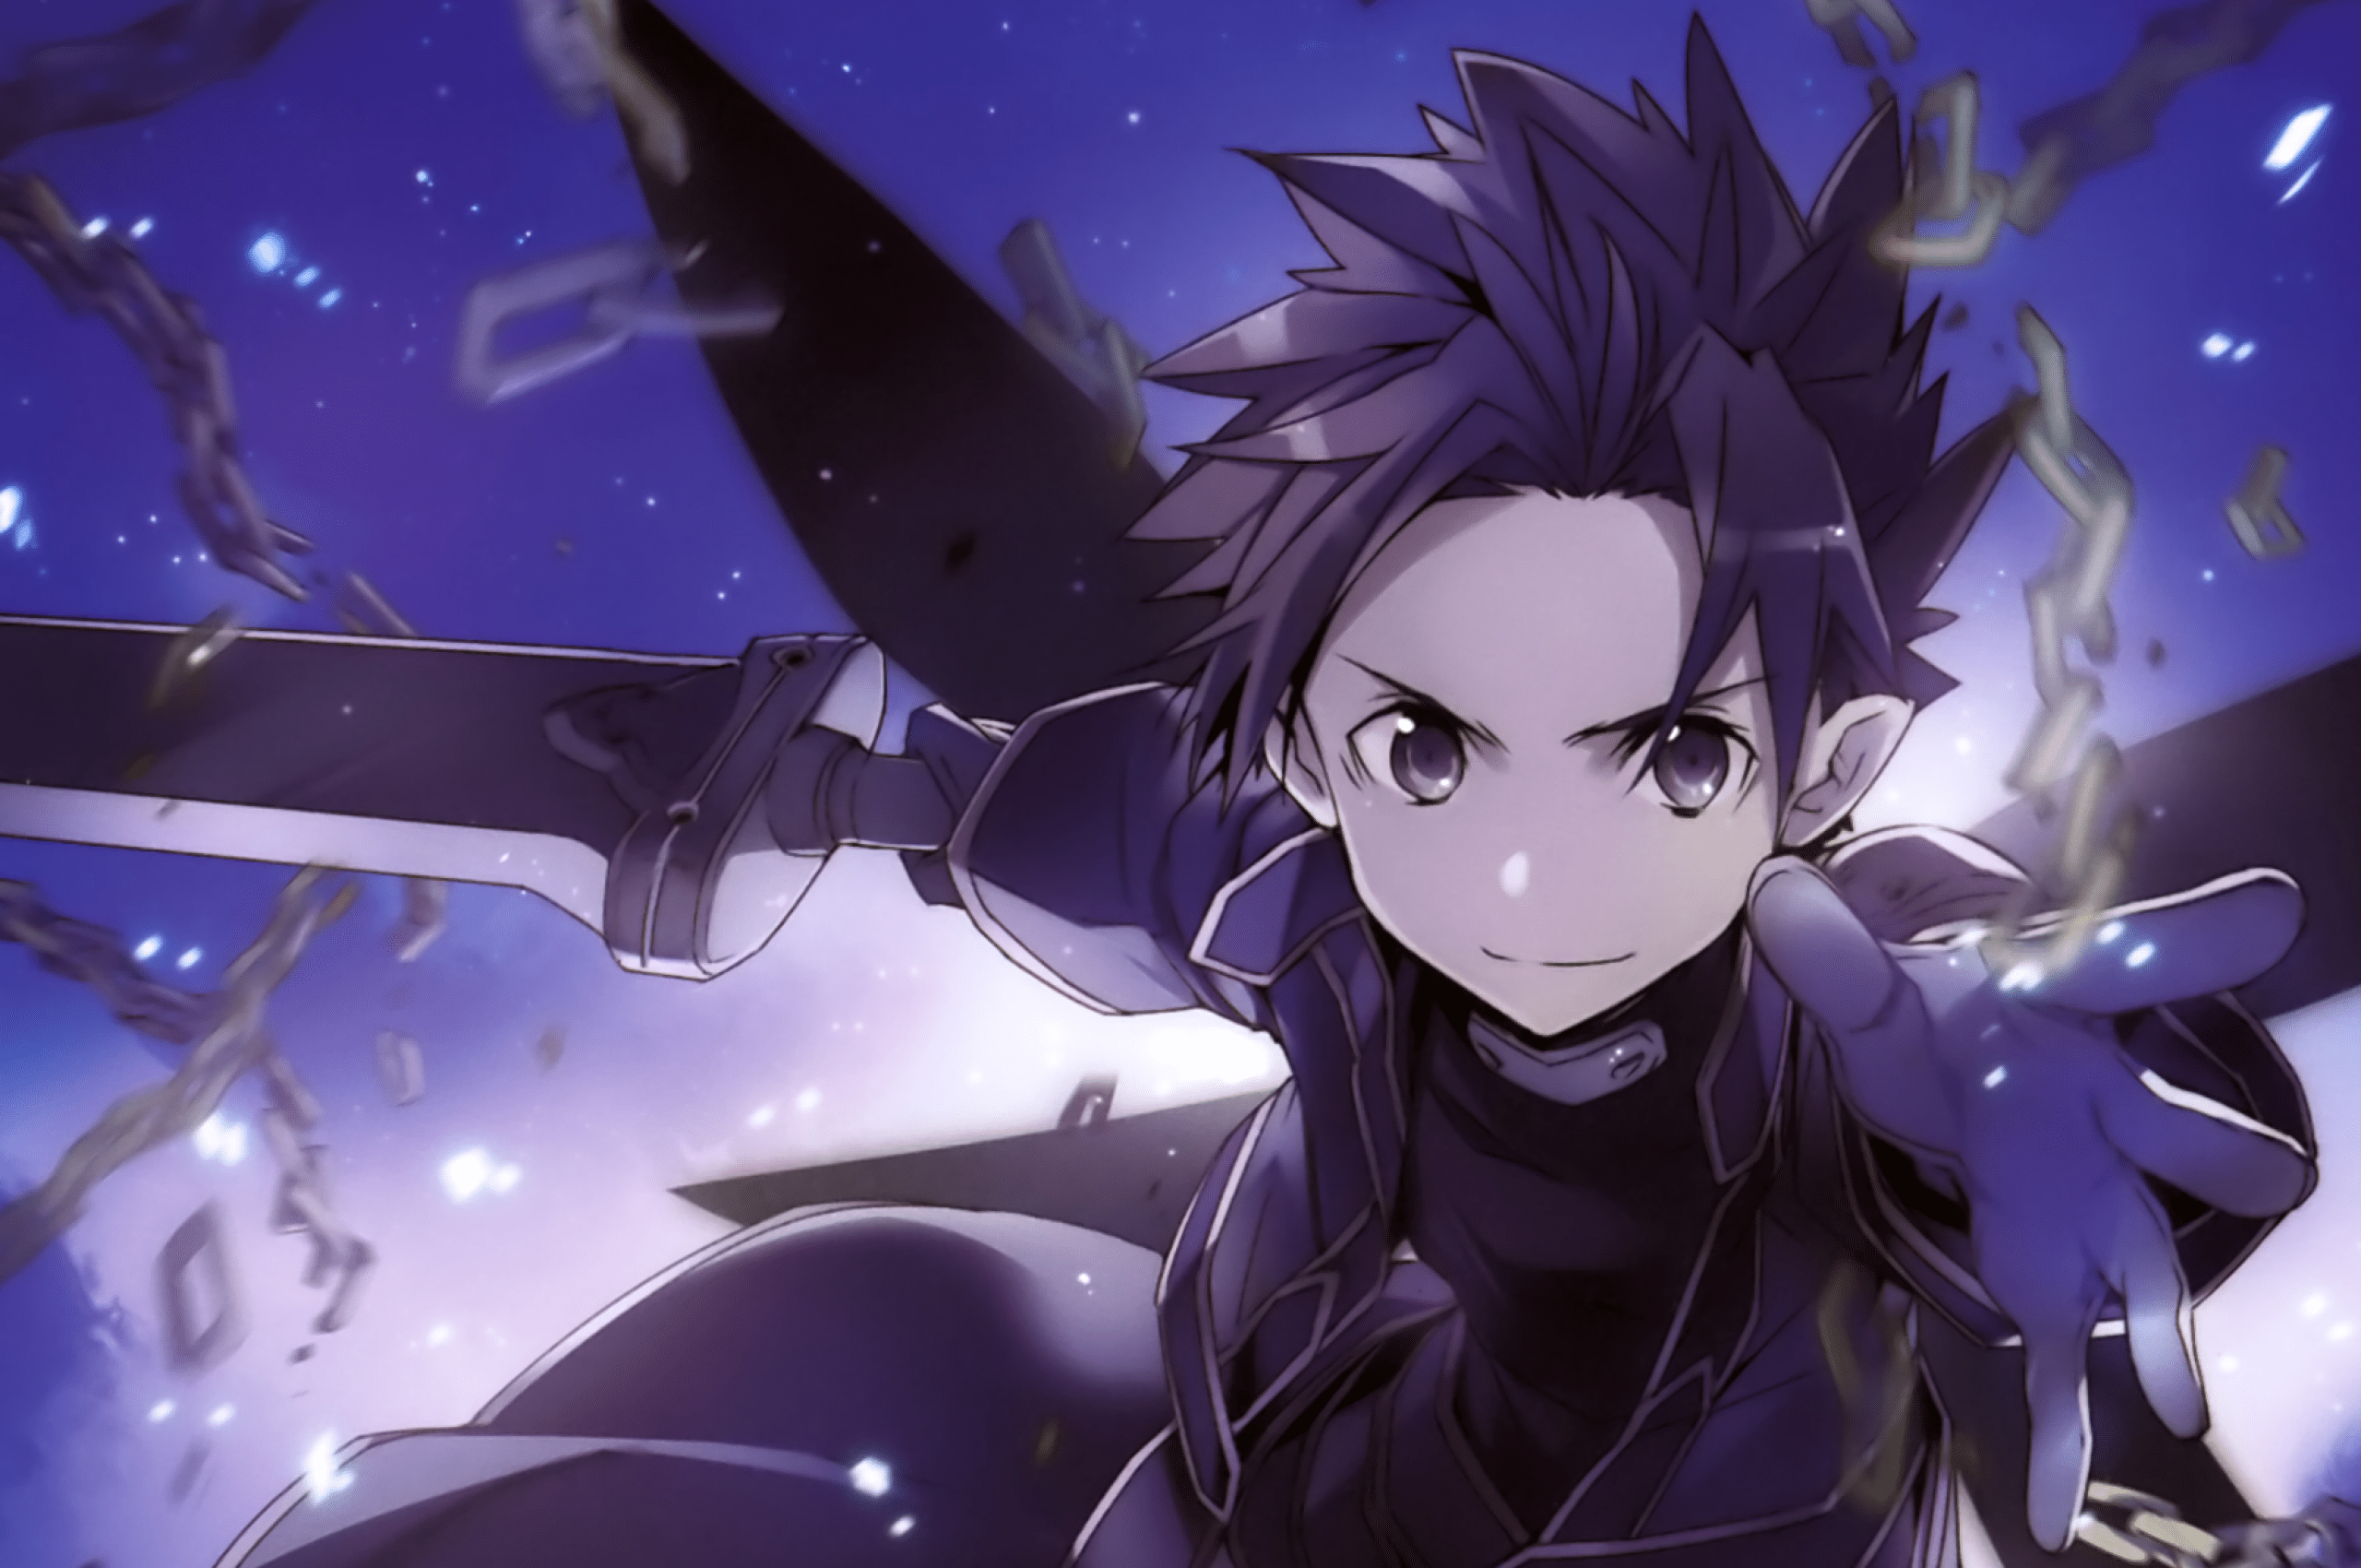 10 strongest characters from Sword Art Online ranked